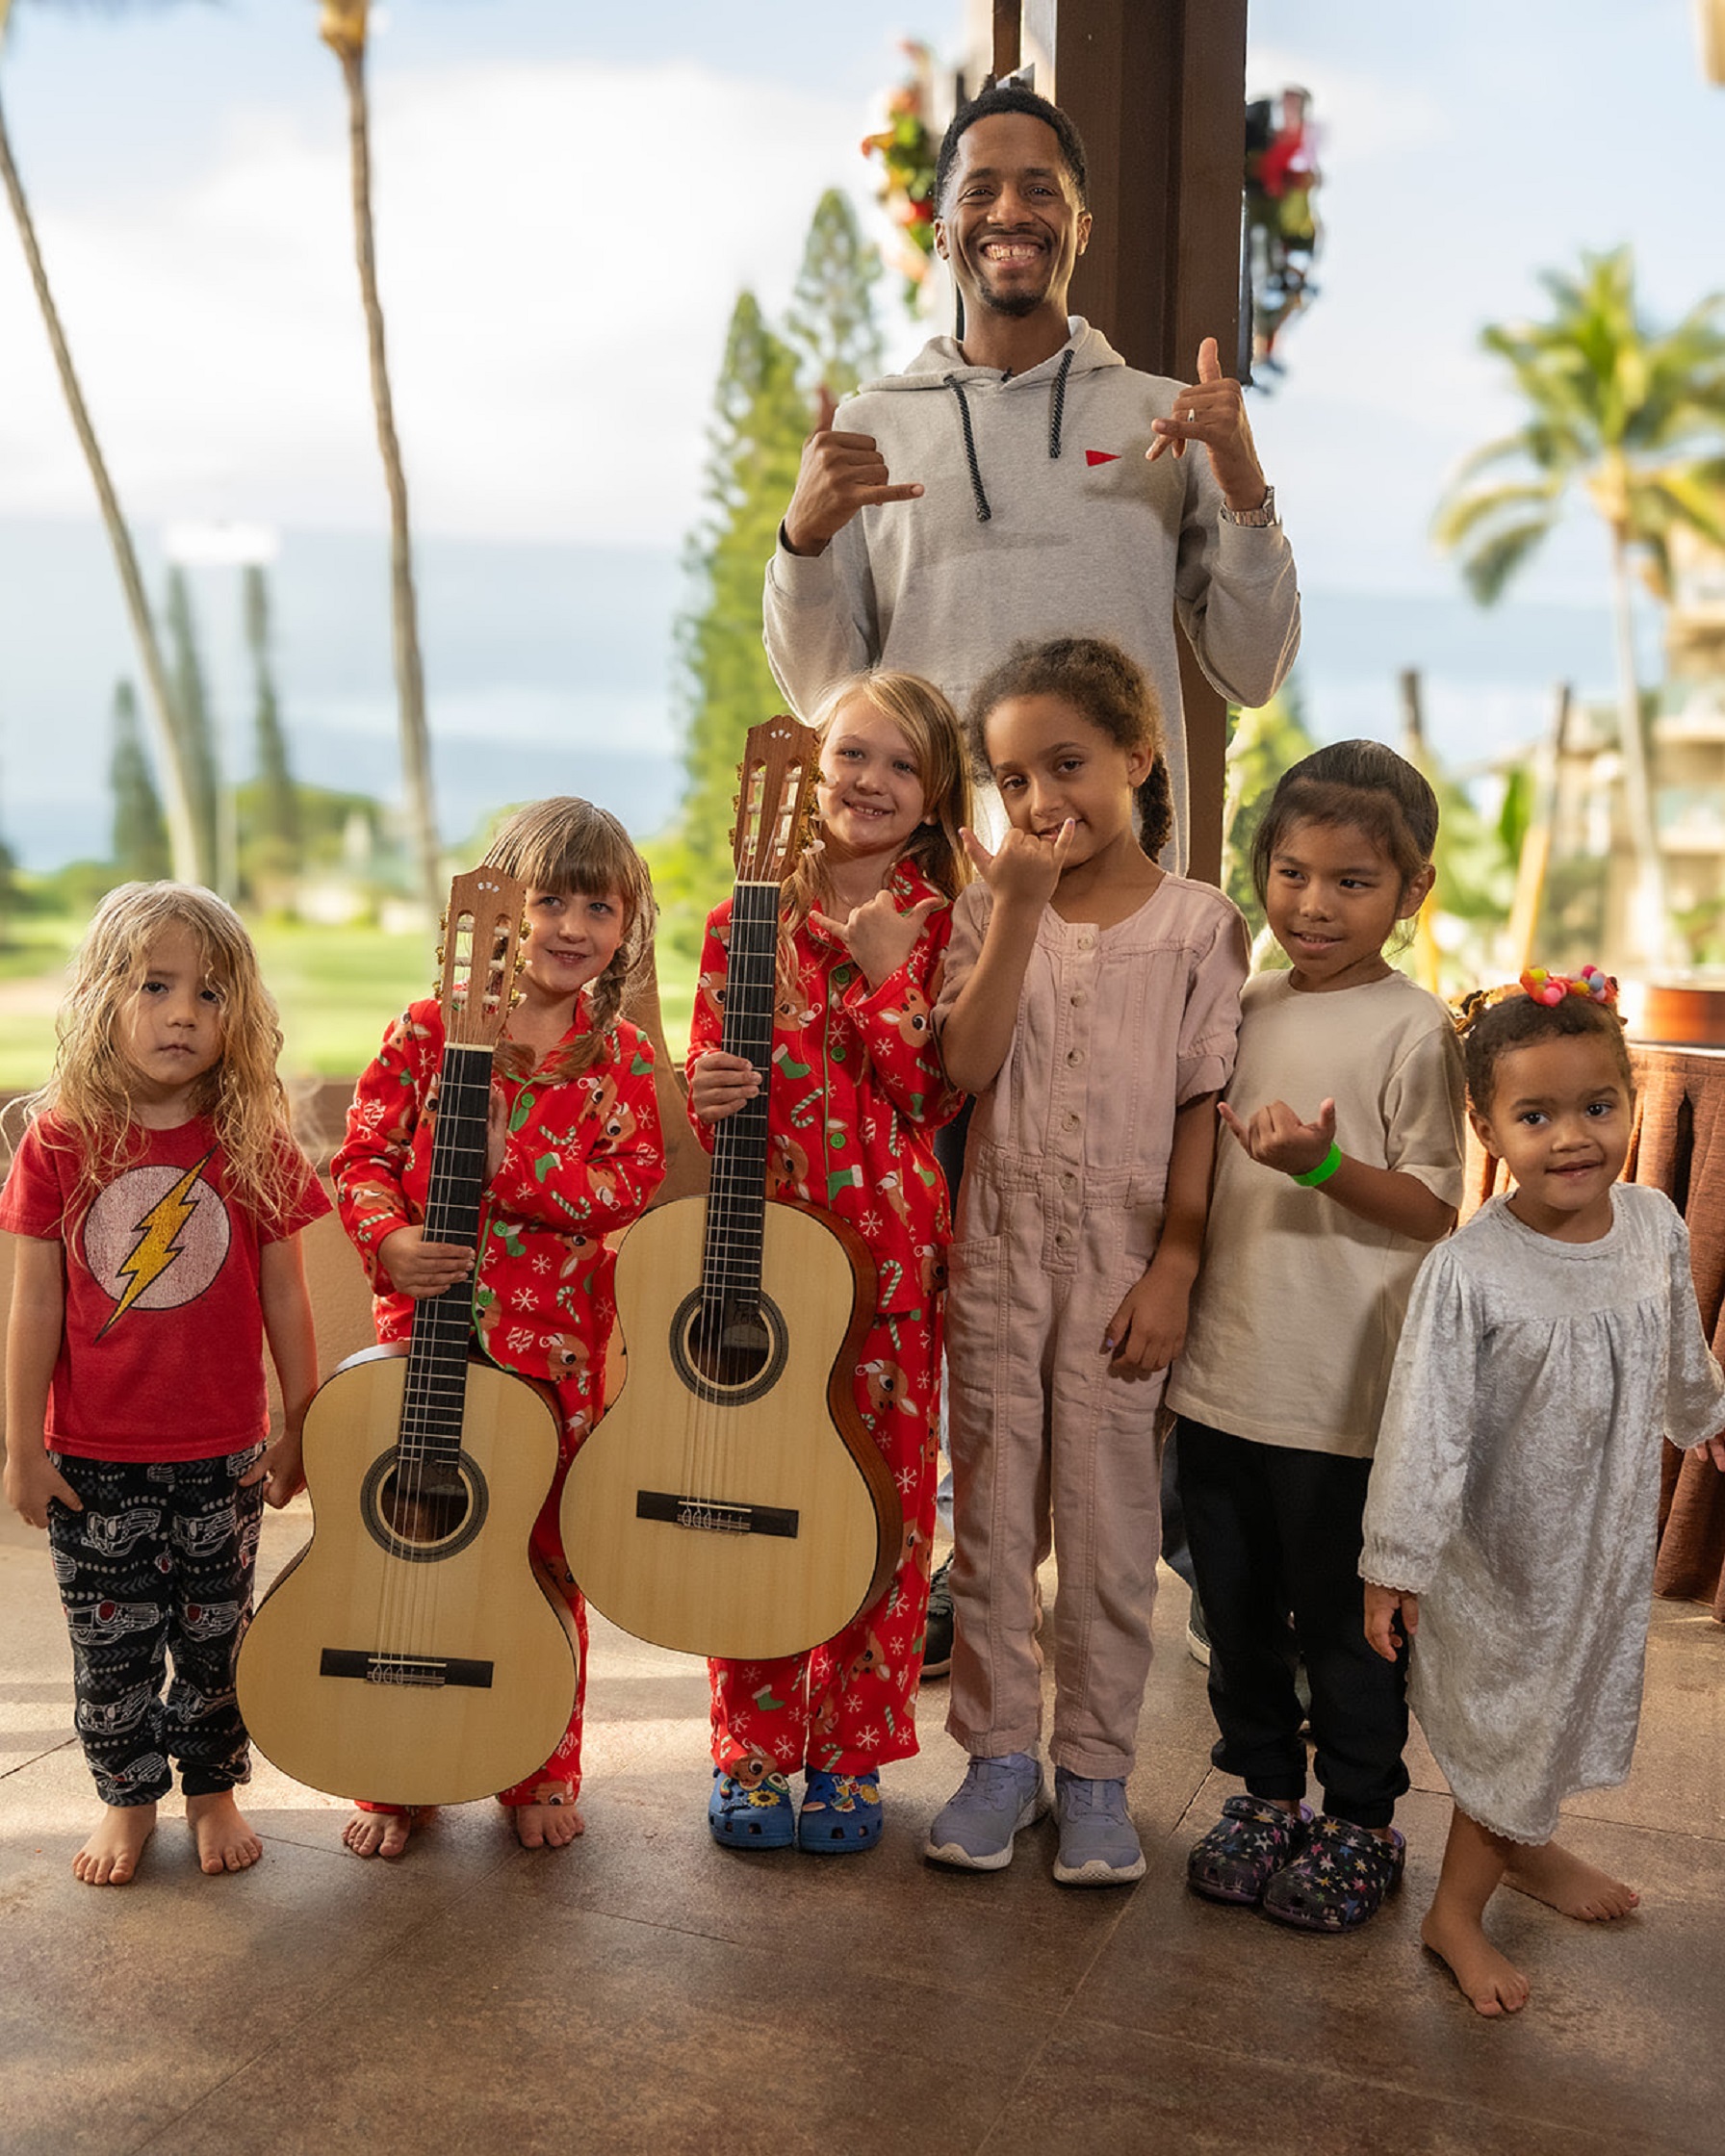 MUSICIAN RON ARTIS II RETURNS TO MAUI TO DONATE INSTRUMENTS TO CHILDREN FOUR MONTHS AFTER THE DEVASTATING FIRES